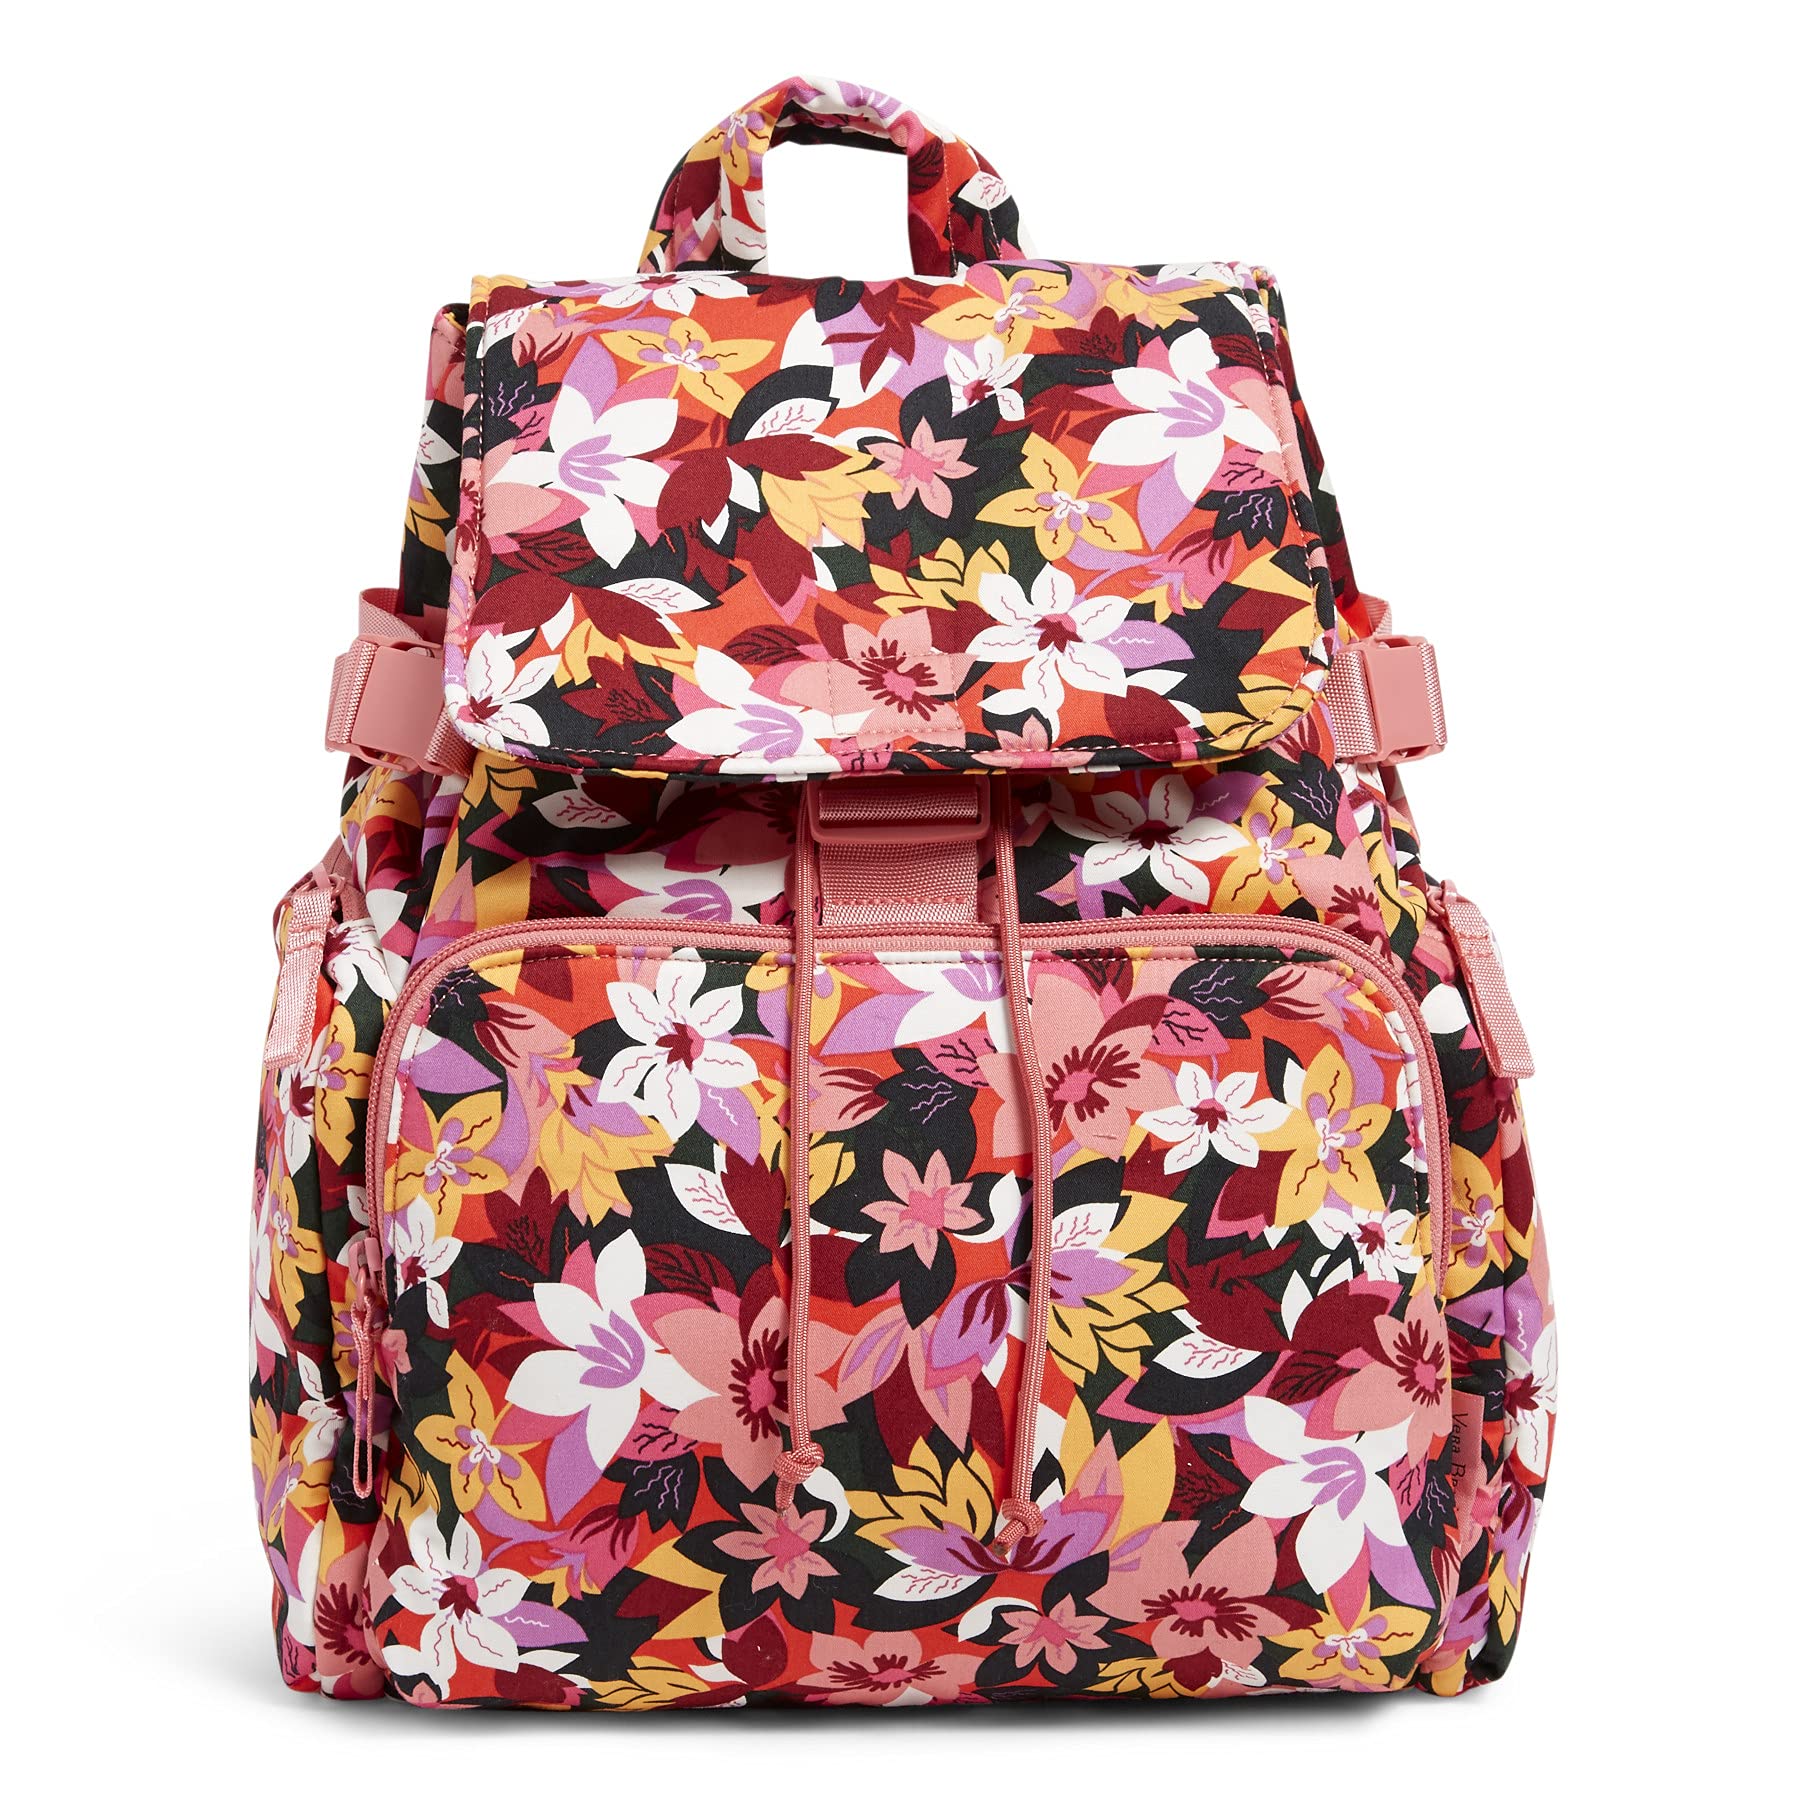 Vera Bradley Women's Cotton Utility Backpack, Rosa Floral - Recycled Cotton, One Size